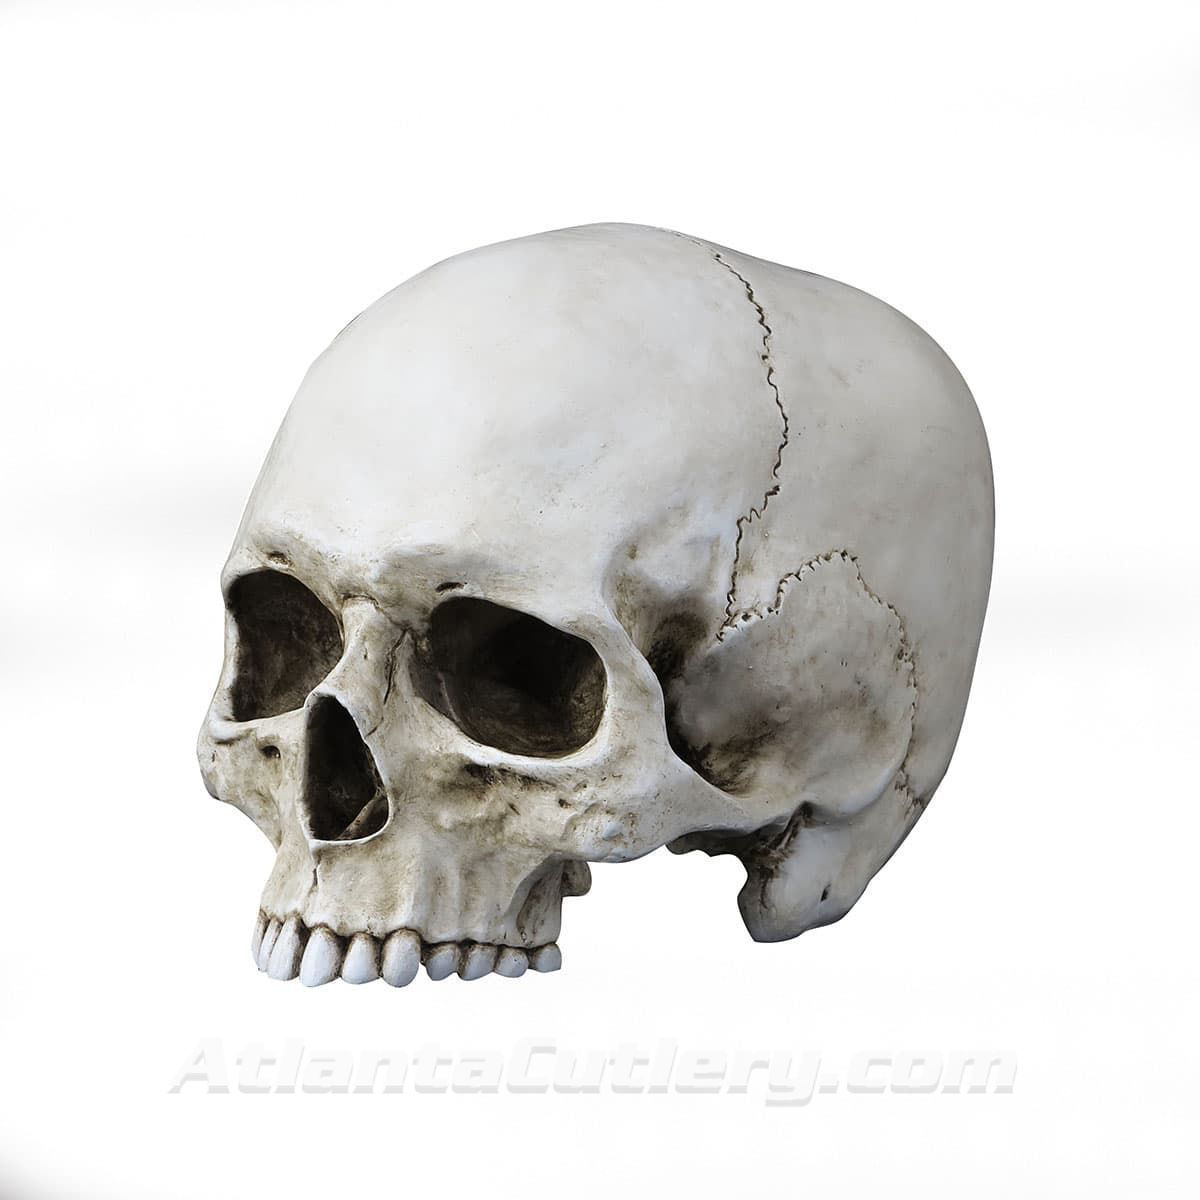 life-size resin skull is jawless and finished to look like real aged bone